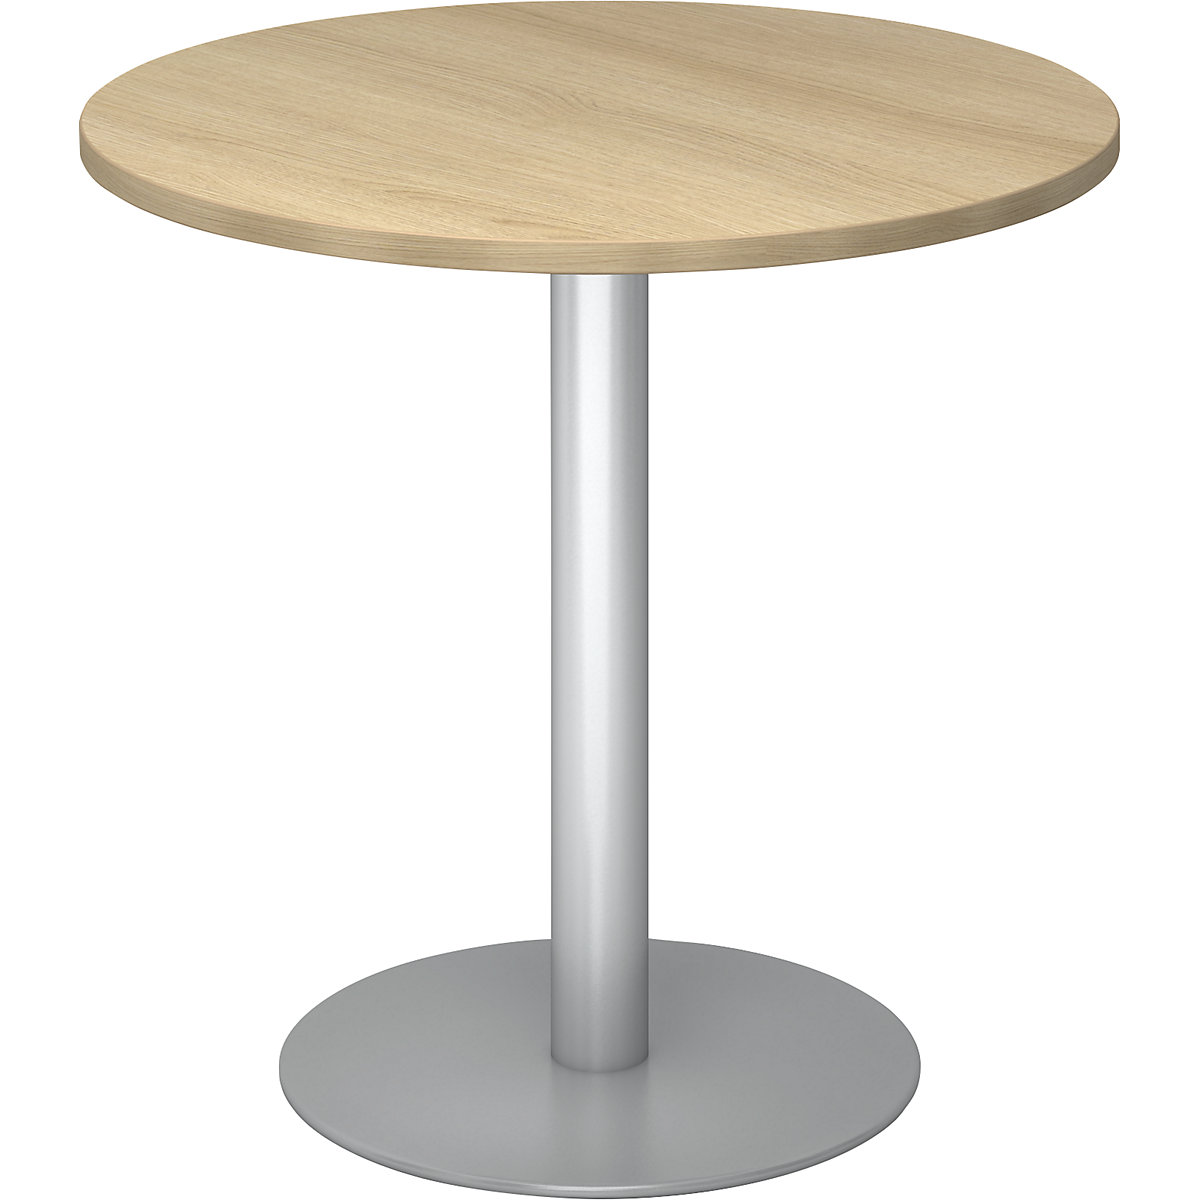 Conference table, Ø 800 mm, 755 mm high, silver frame, tabletop in oak finish-3